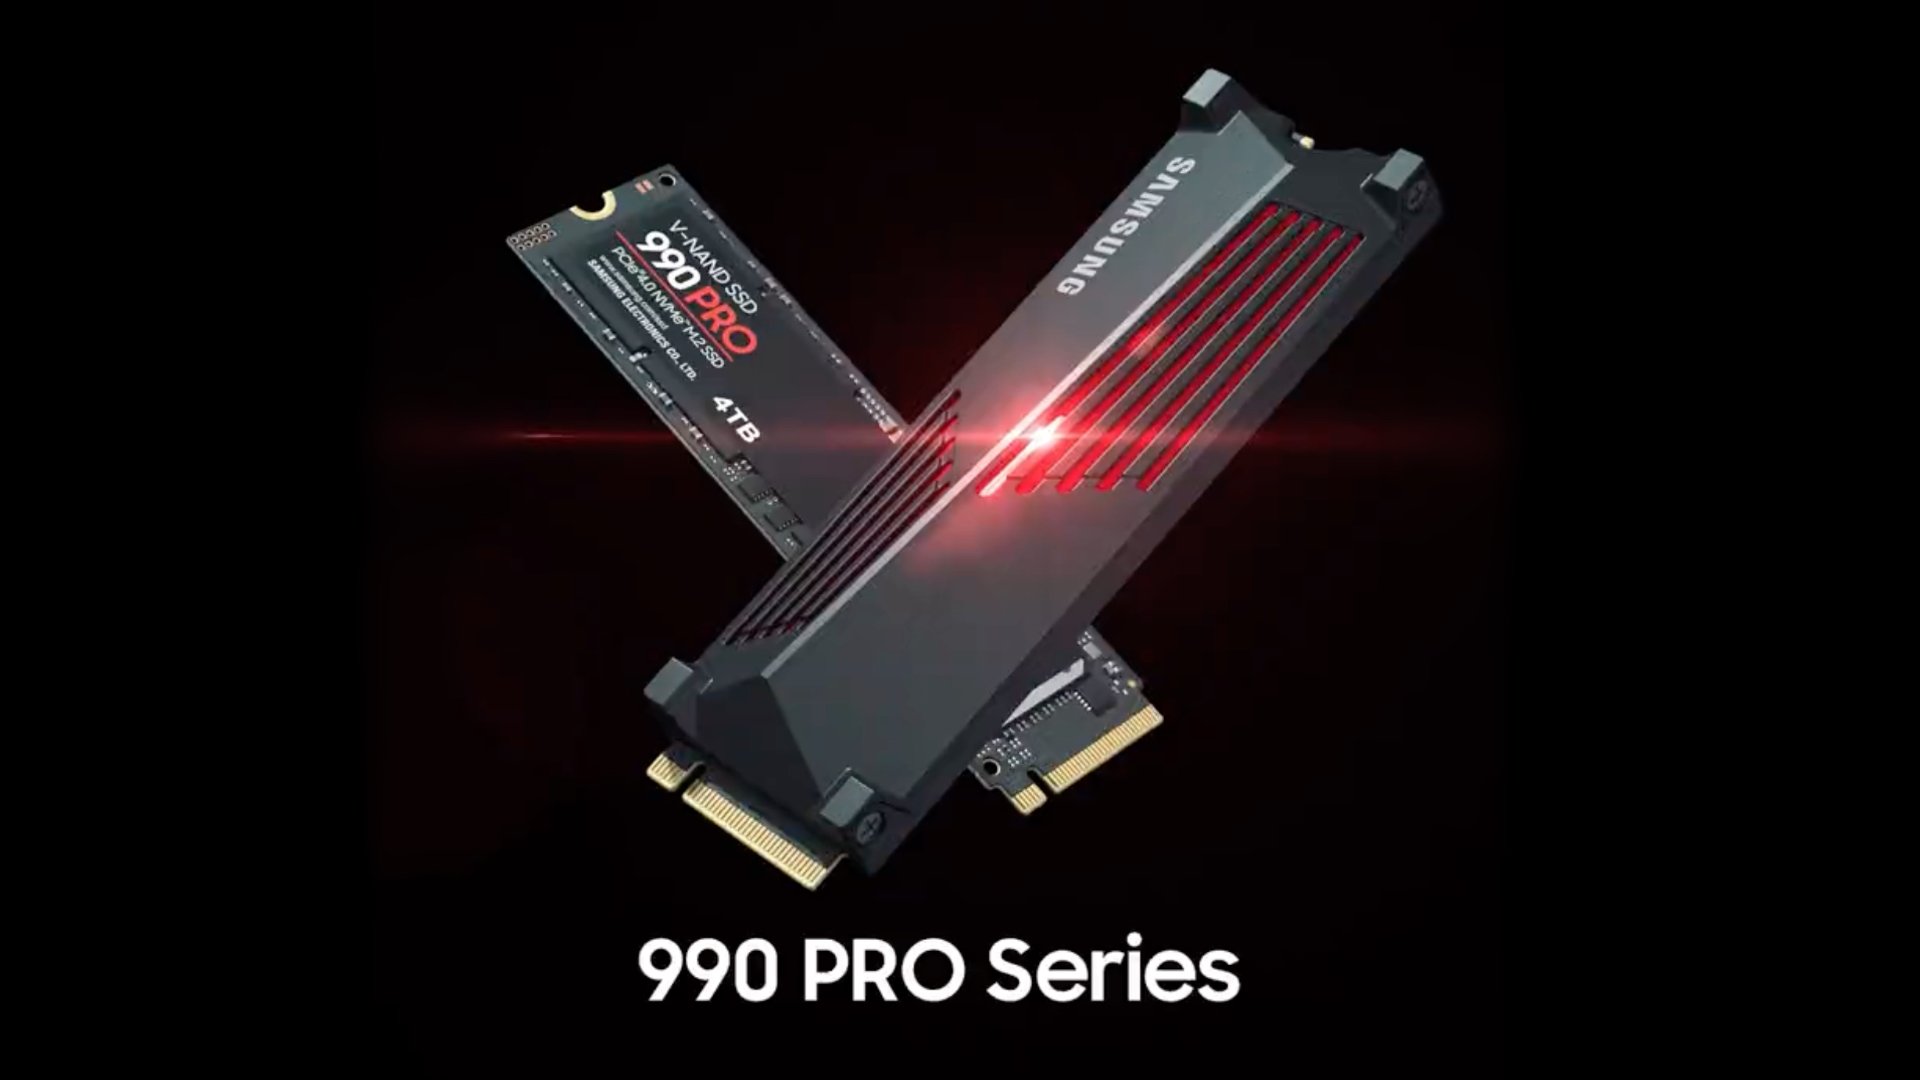 Samsung Launches Its 990 PRO SSD Series, The Ultimate PCIe Gen 4